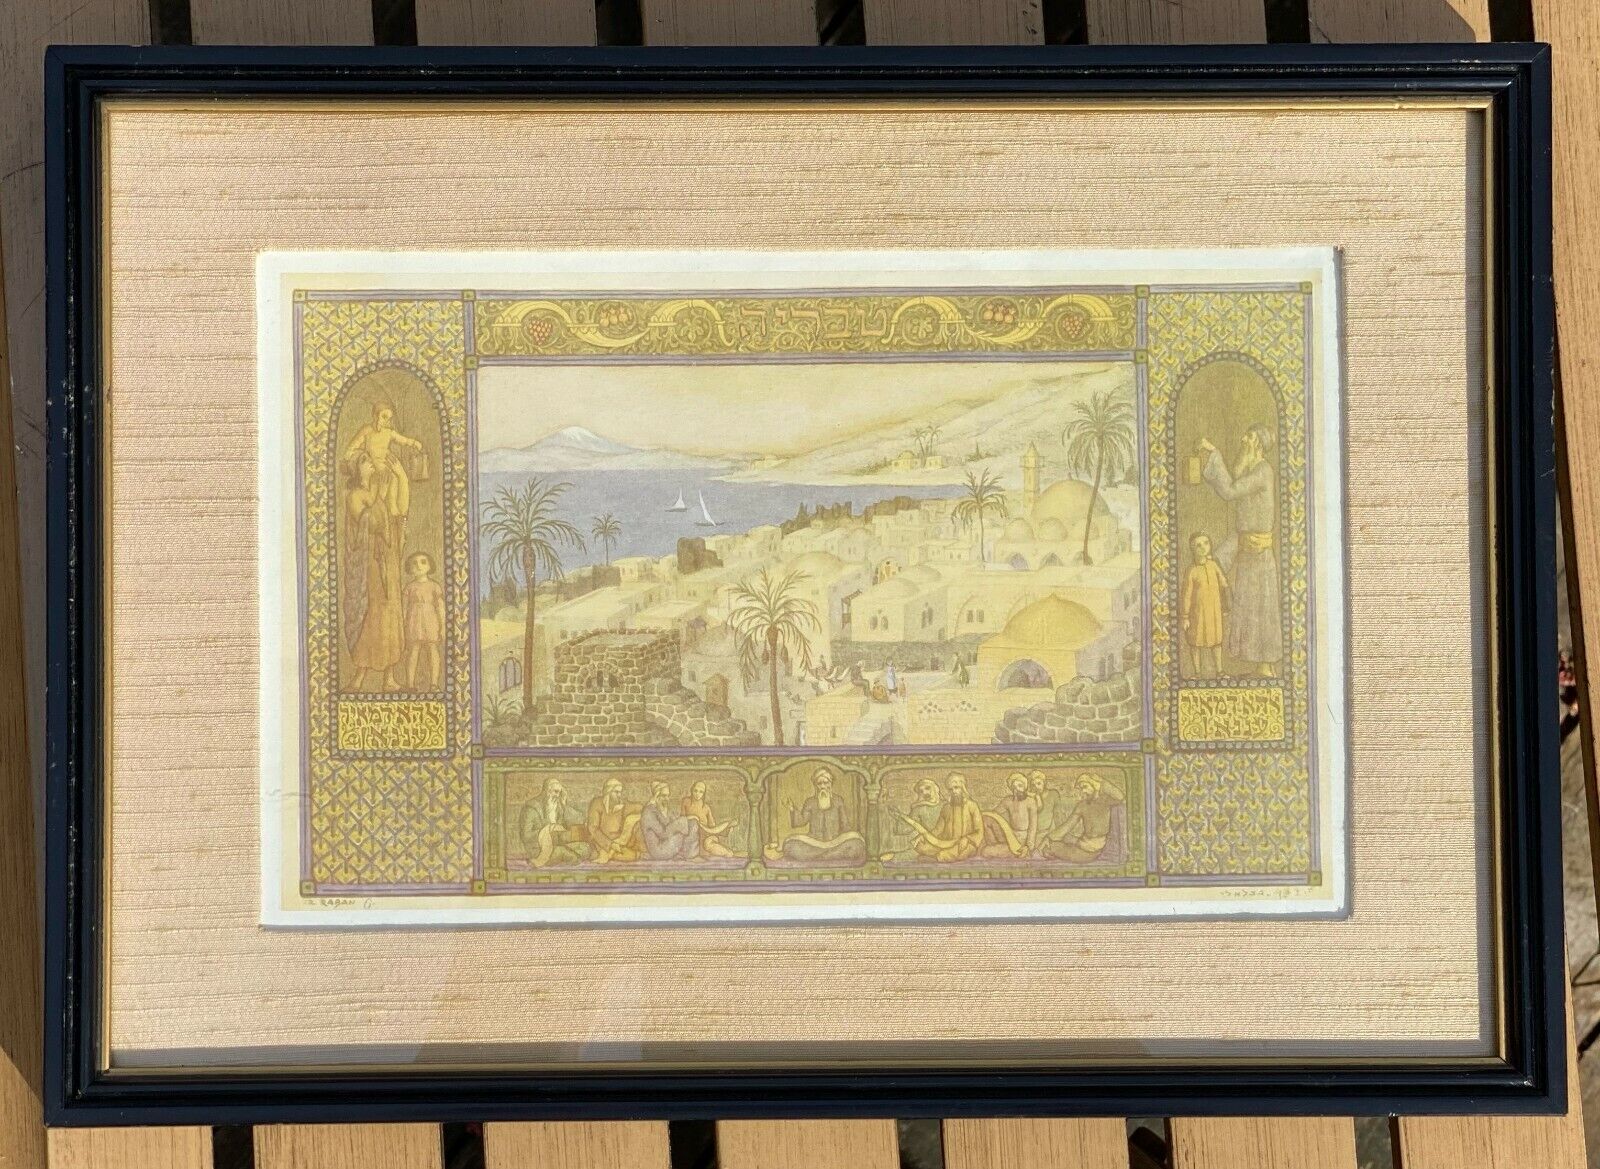 Ze’ev Raban - Tiberias - 1950s vintage lithograph - beautifully framed & matted